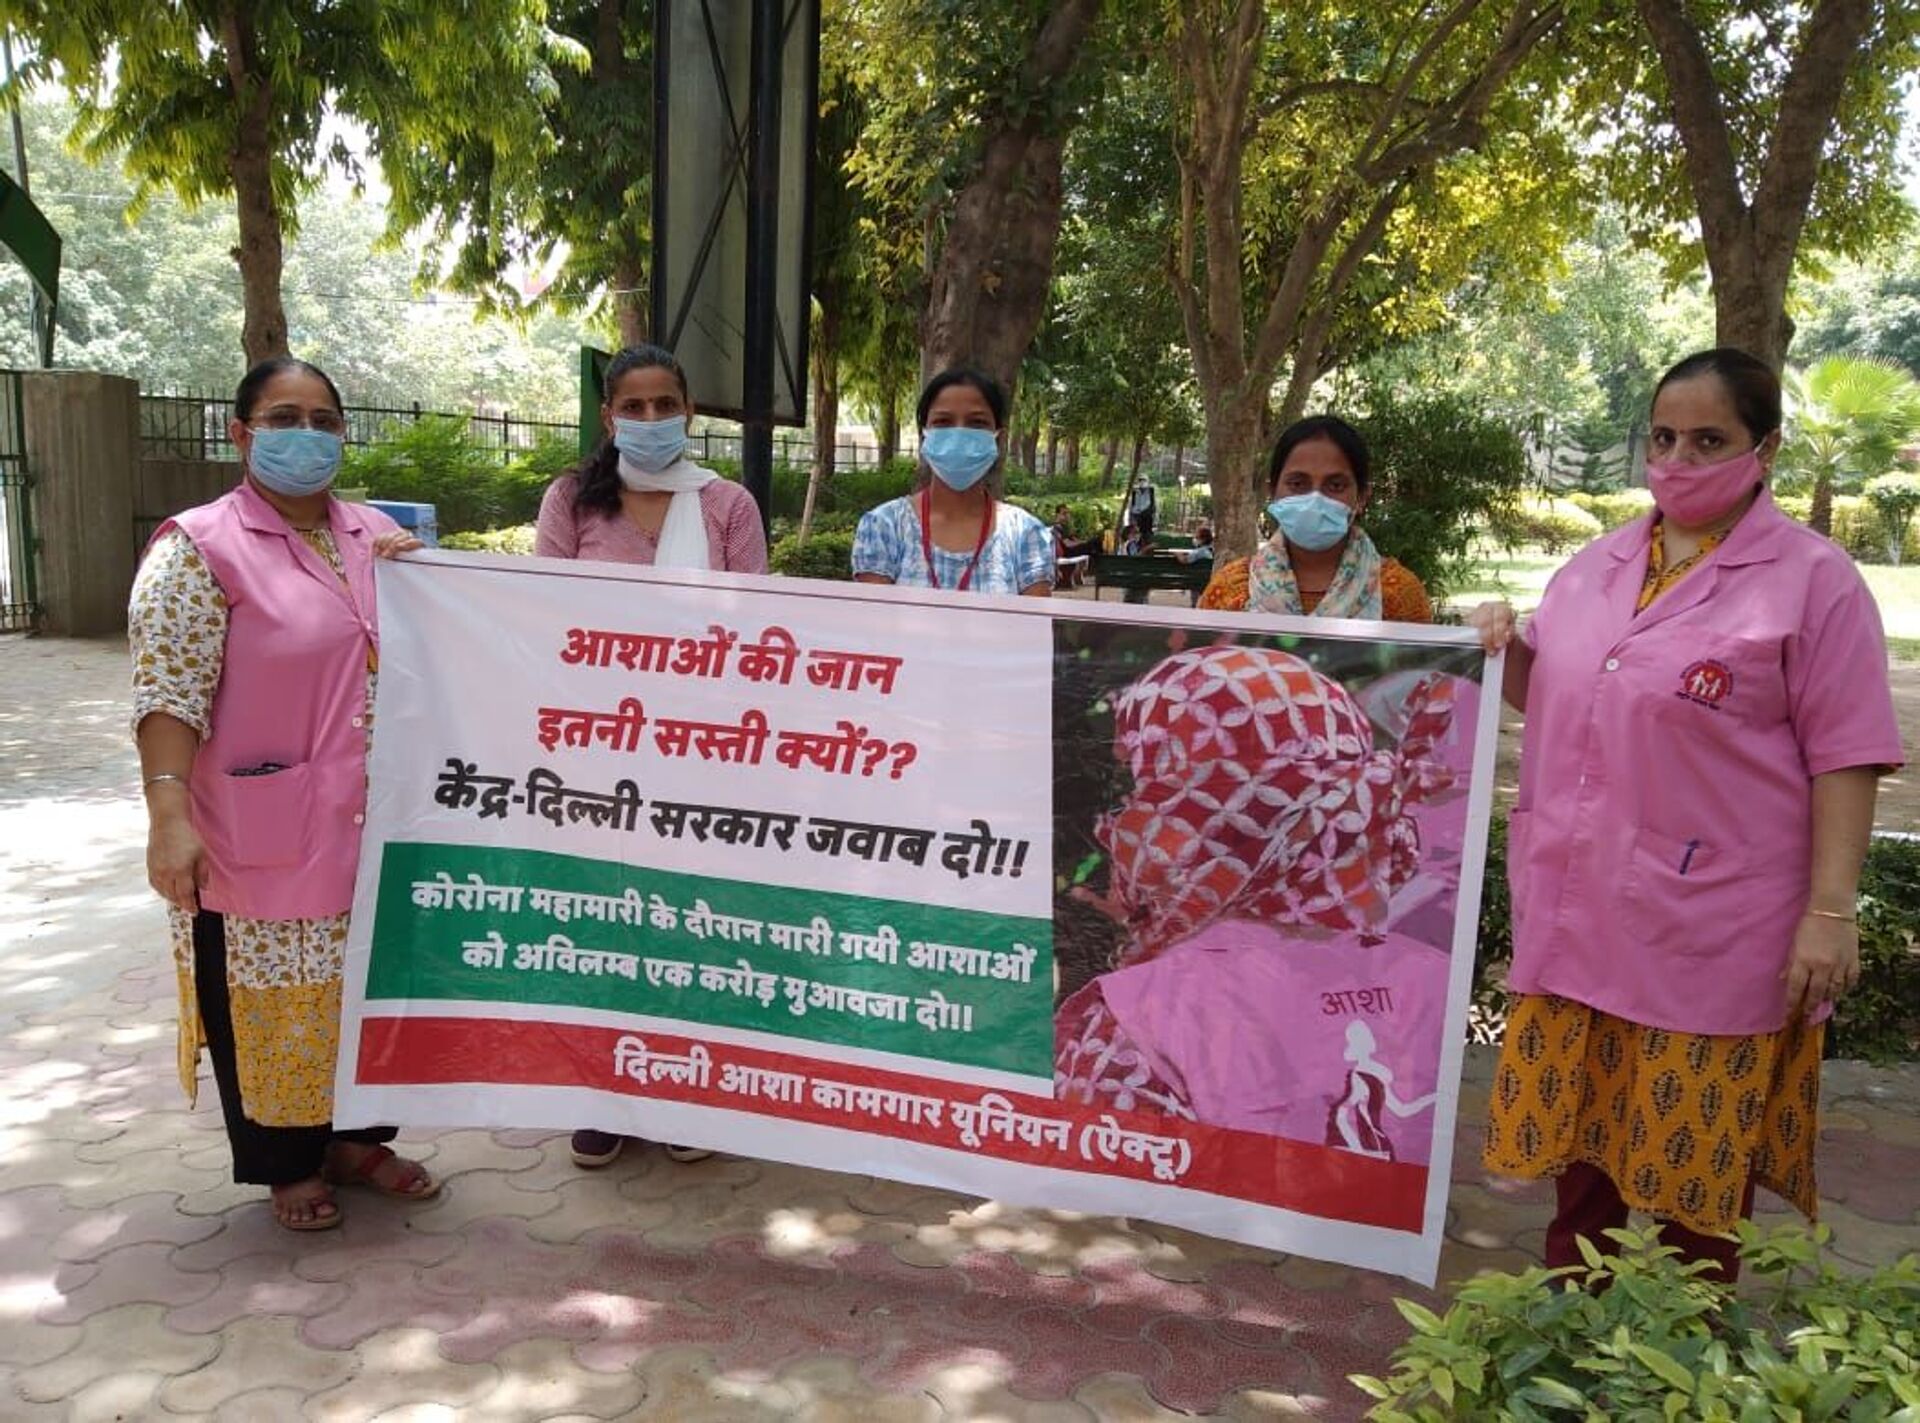 ASHA workers demand fixed wages and social security guarantees amid pandemic as they protest outside South Delhi's Gautam Nagar primary health care dispensary - Sputnik International, 1920, 07.09.2021